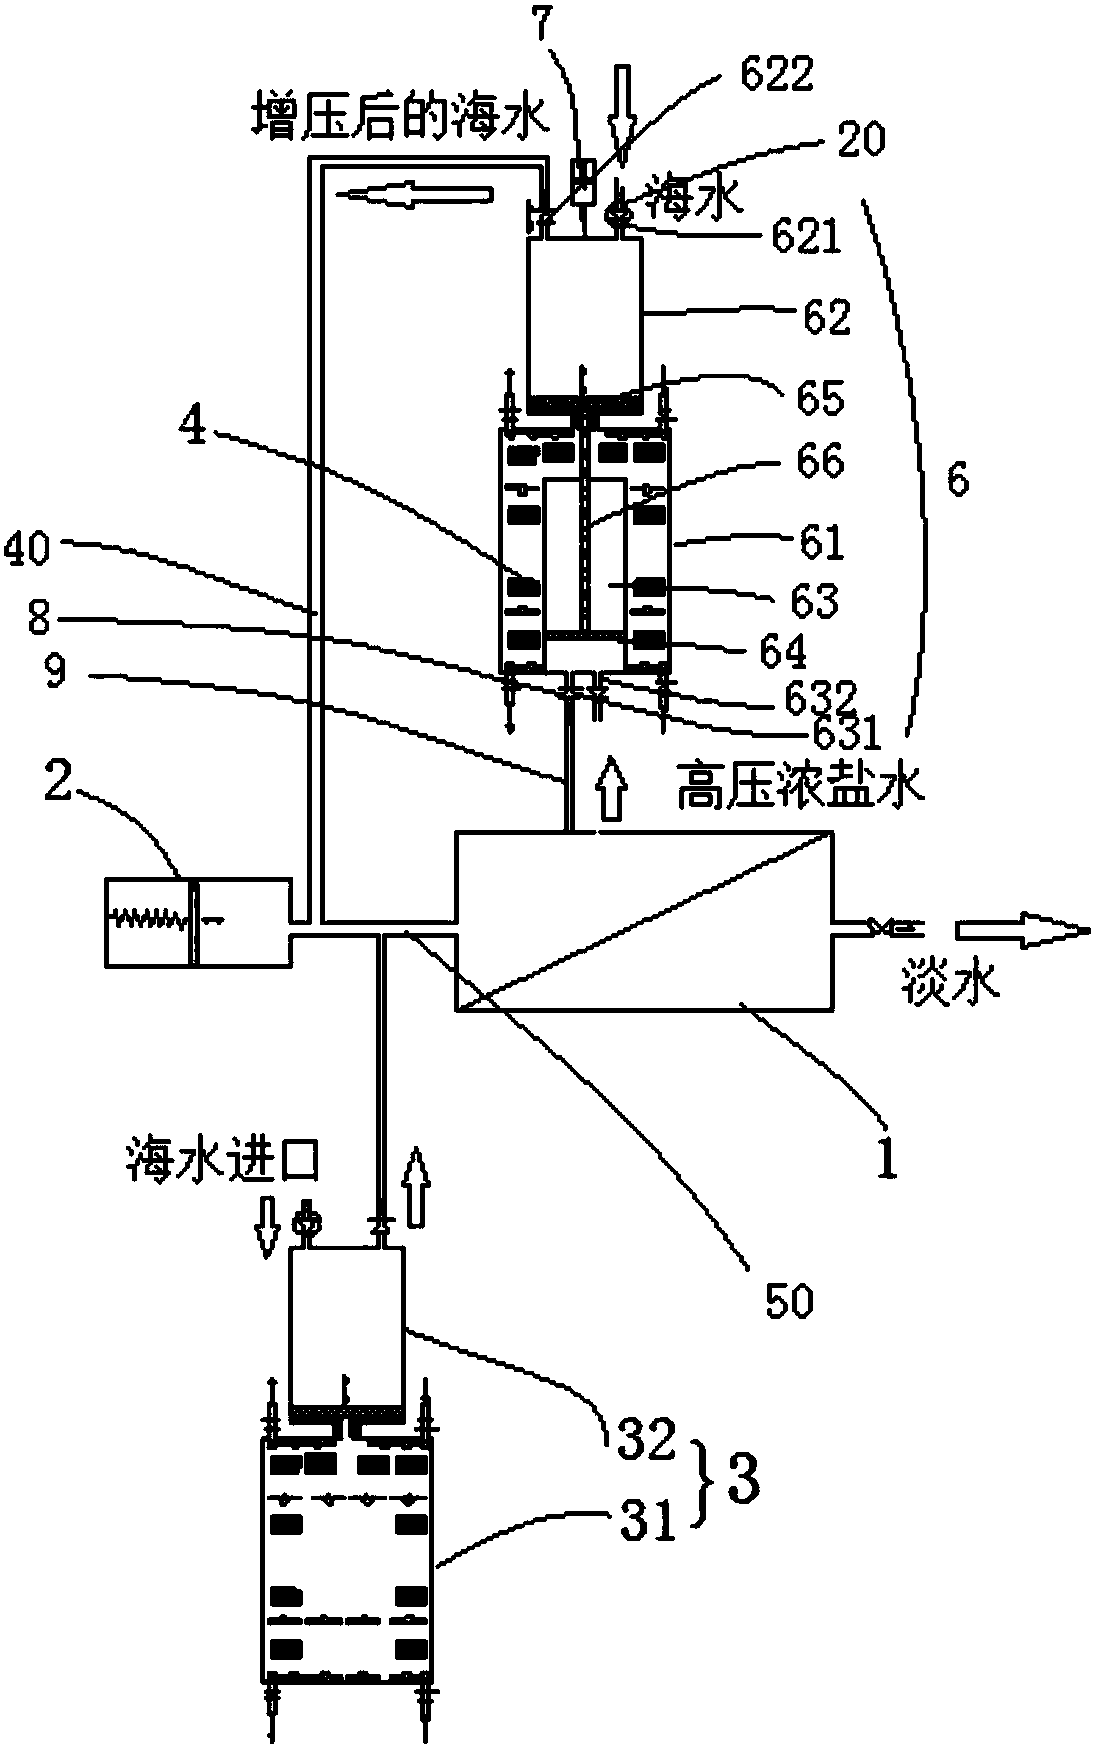 Seawater desalination device and composite system utilizing temperature difference drive